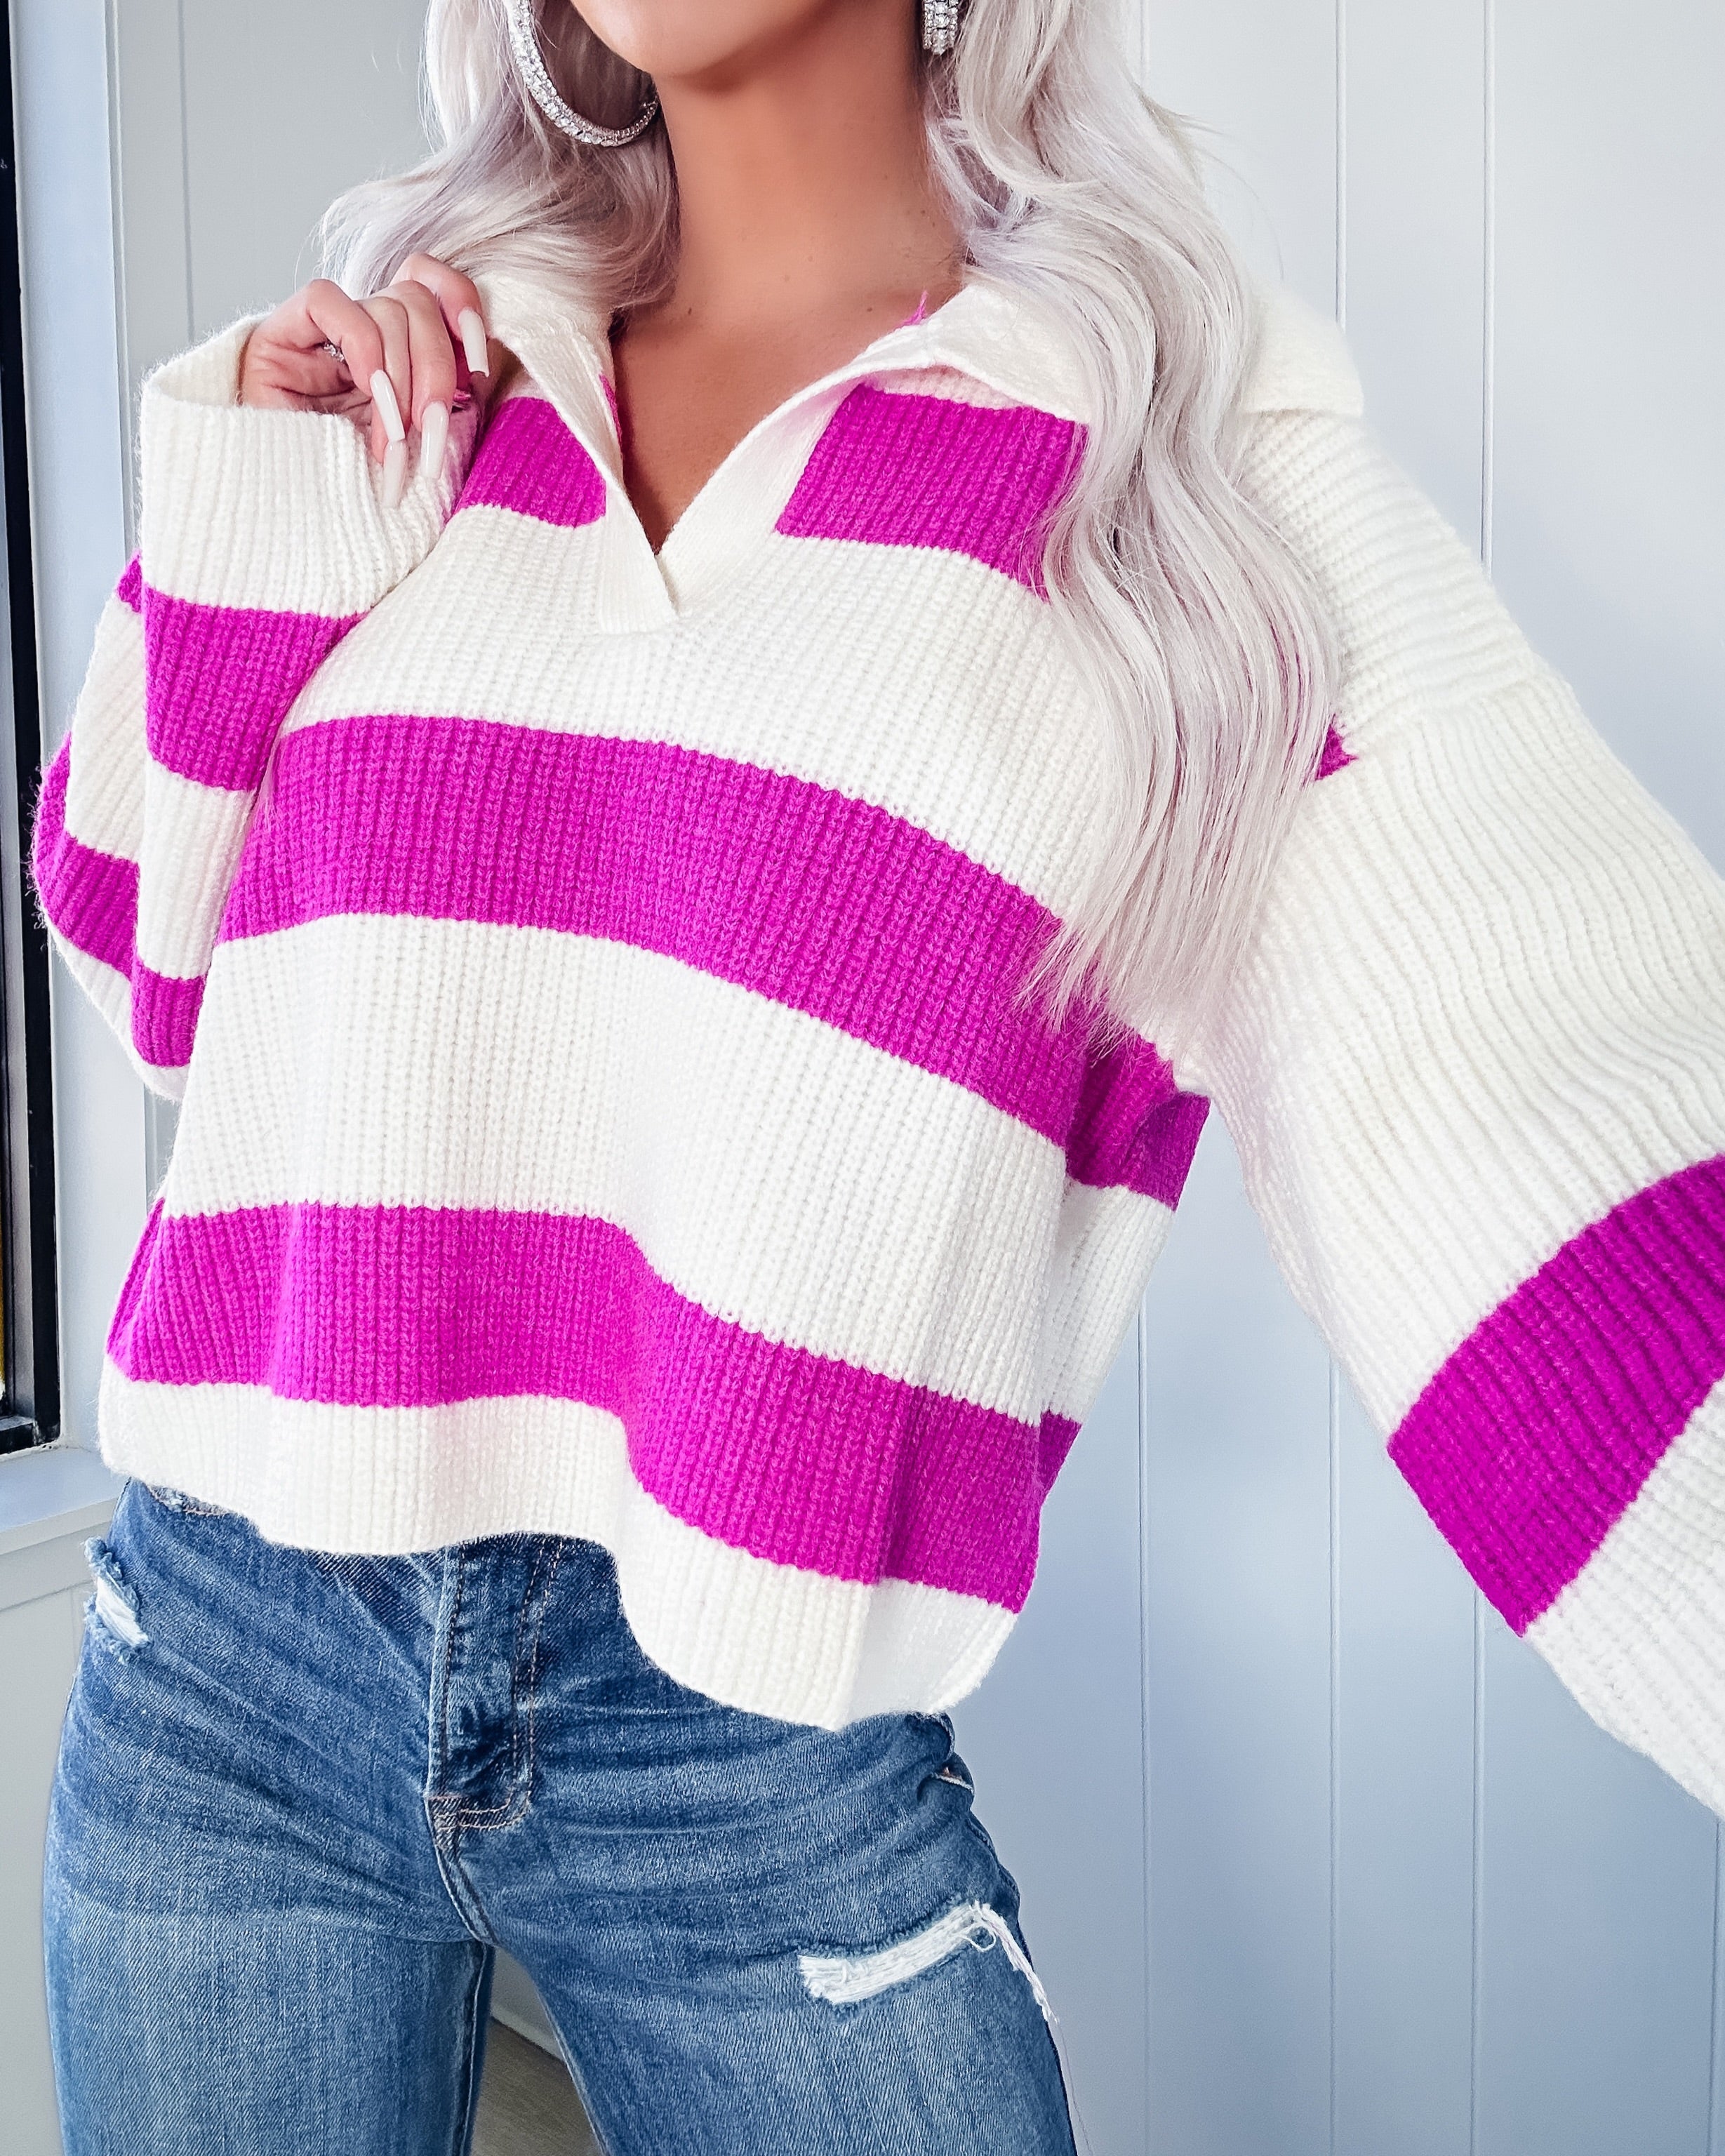 Always Fashionable Collared Crop Stiped Sweater - Ivory/Fuchsia